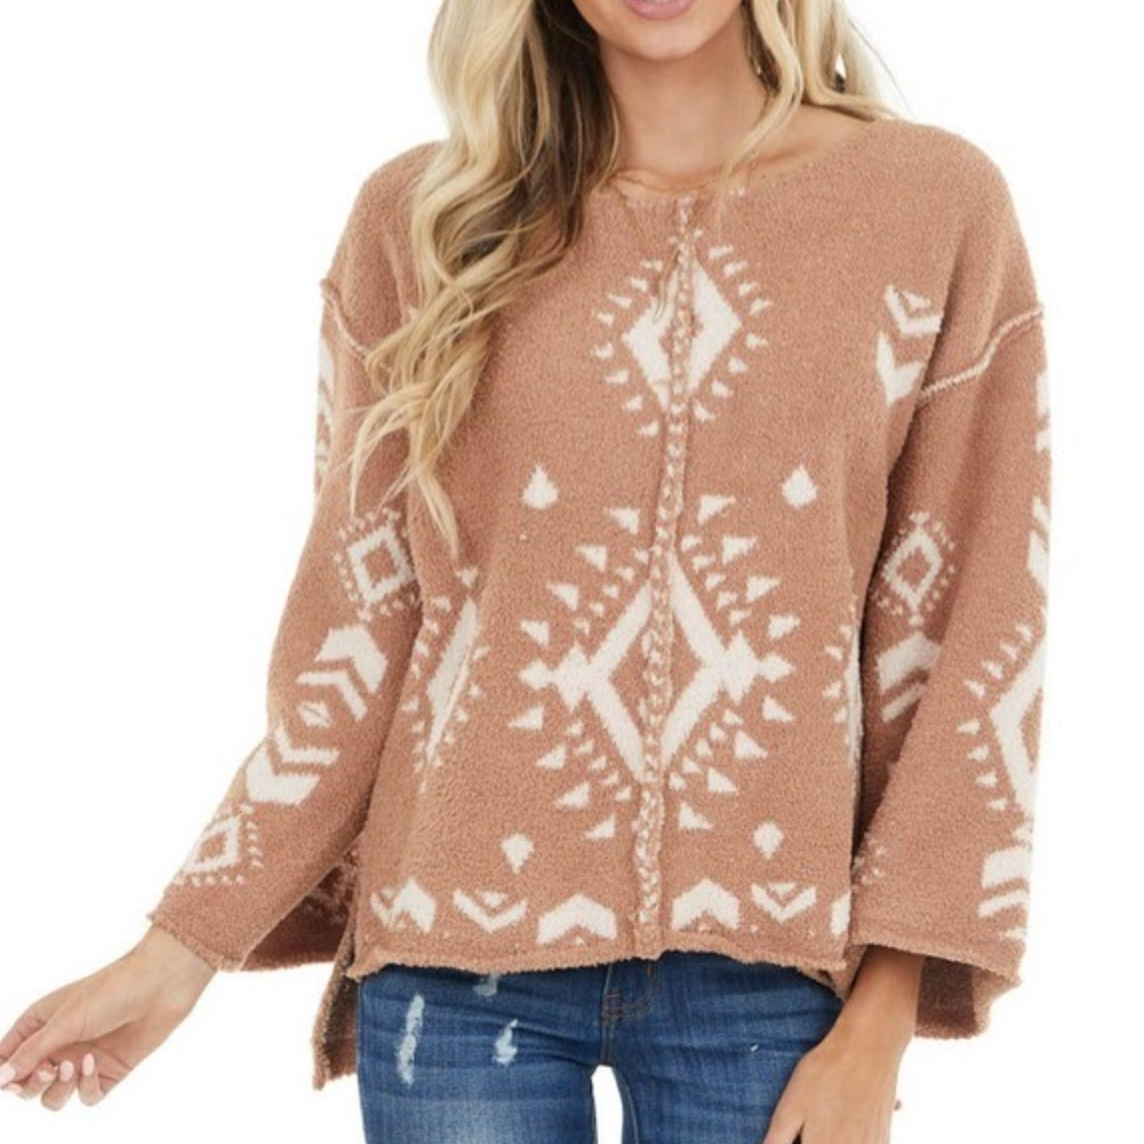 Tribal Aztec Print Sweater Taupe